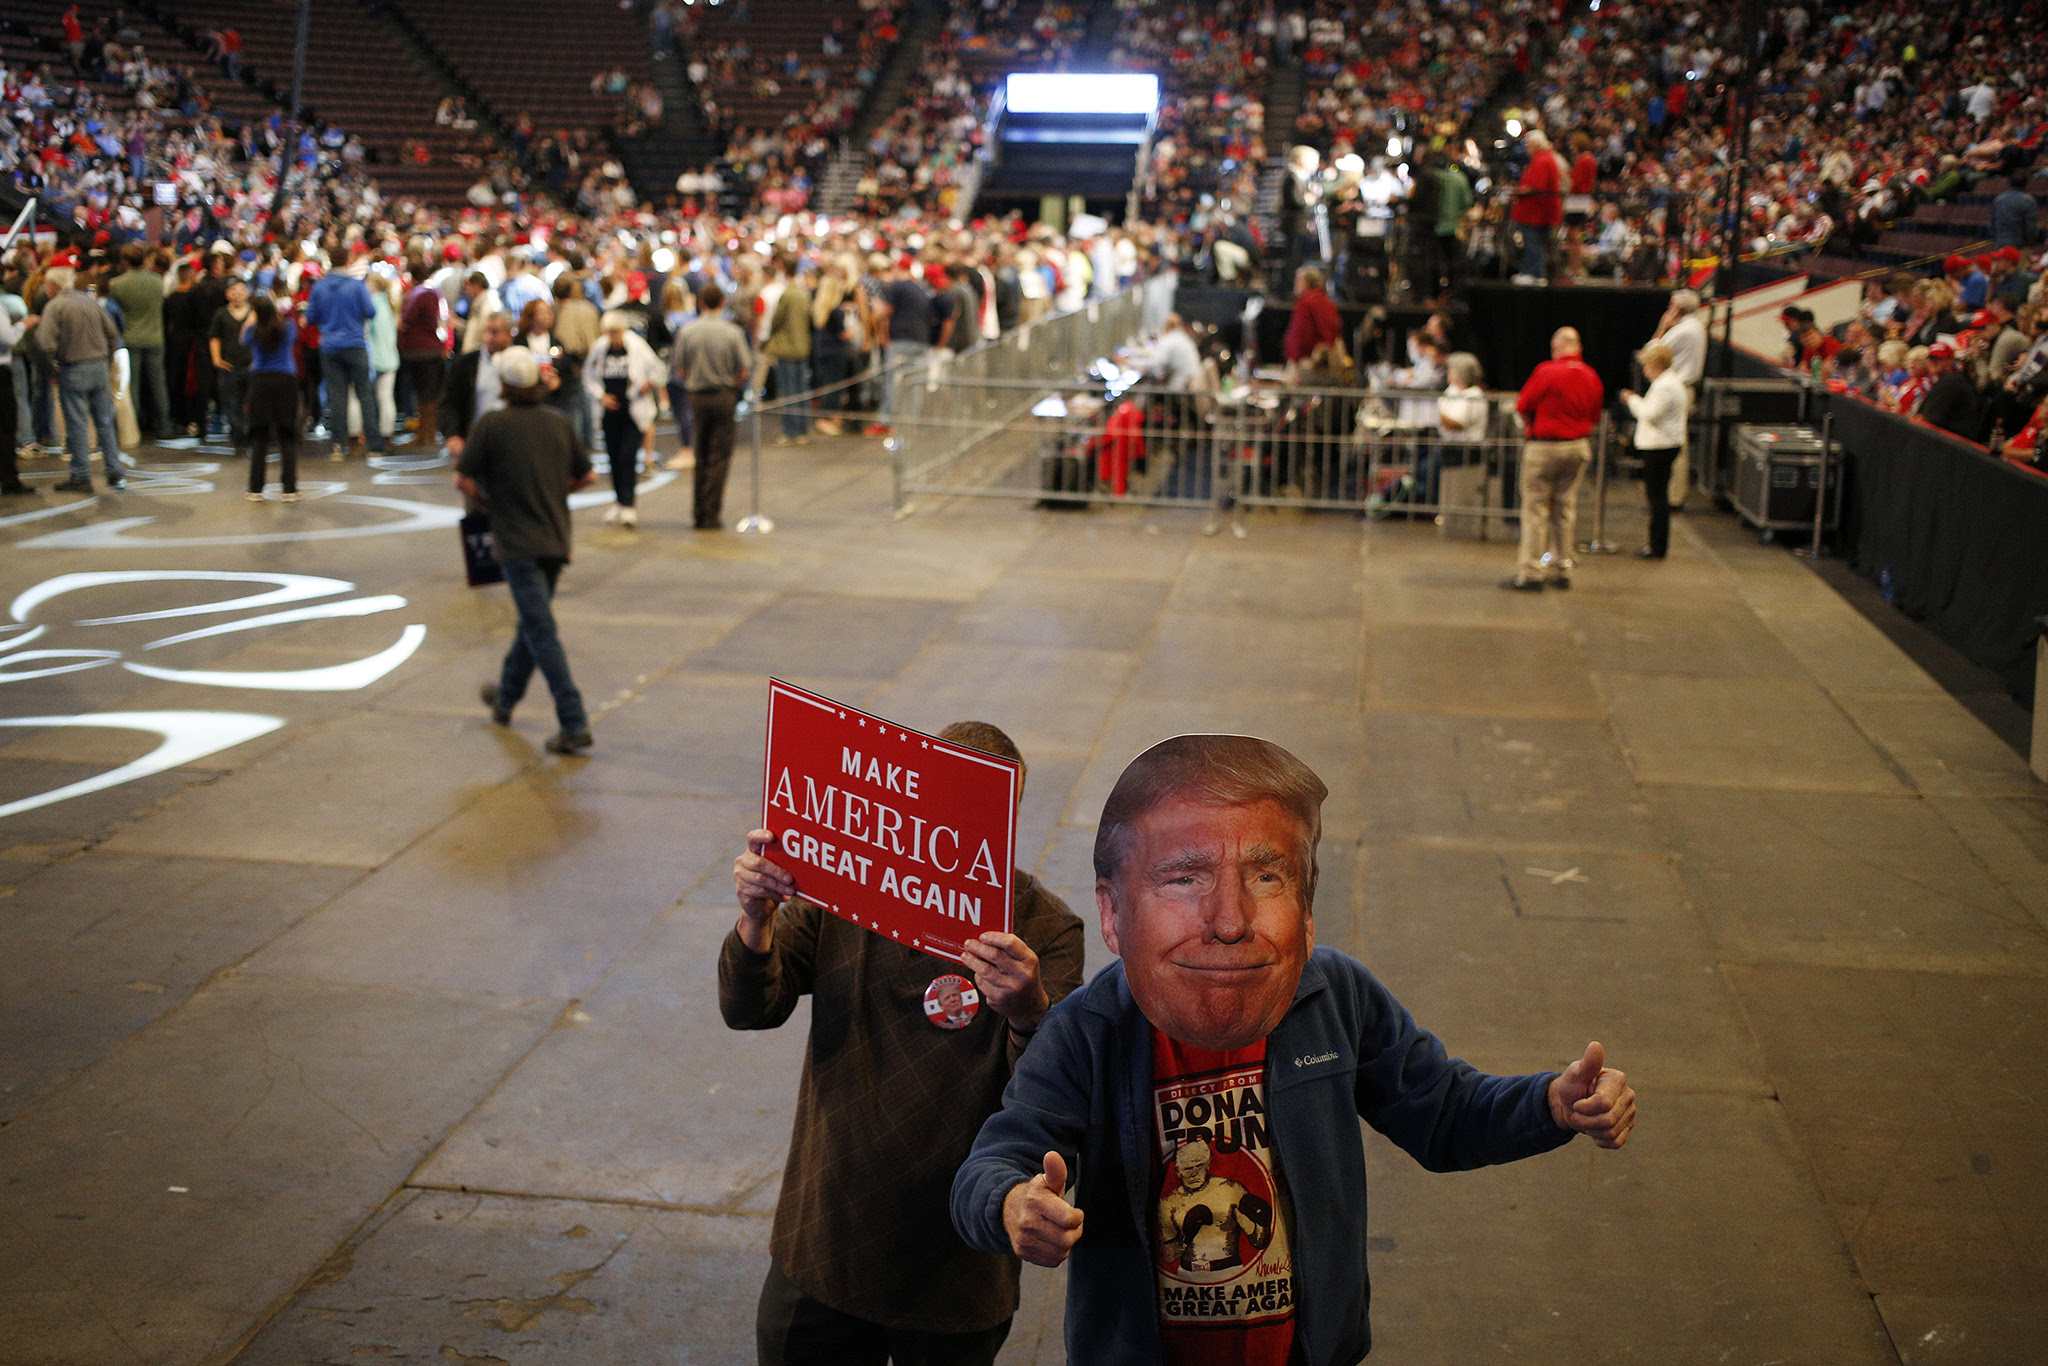 gAn attendee gives the thumbs up while wearing a Donald Trump mask during a campaign event for Donald Trump, 2016 Republican presidential nominee, in Cincinnati, Ohio, U.S., on Thursday, Oct. 13, 2016. Trump rebuffed political aides' requests to research his past, people familiar with the matter said, a decision that contributed to his campaign being caught unprepared for the past week's barrage of claims he mistreated women. Photographer: Luke Sharrett/Bloomberg